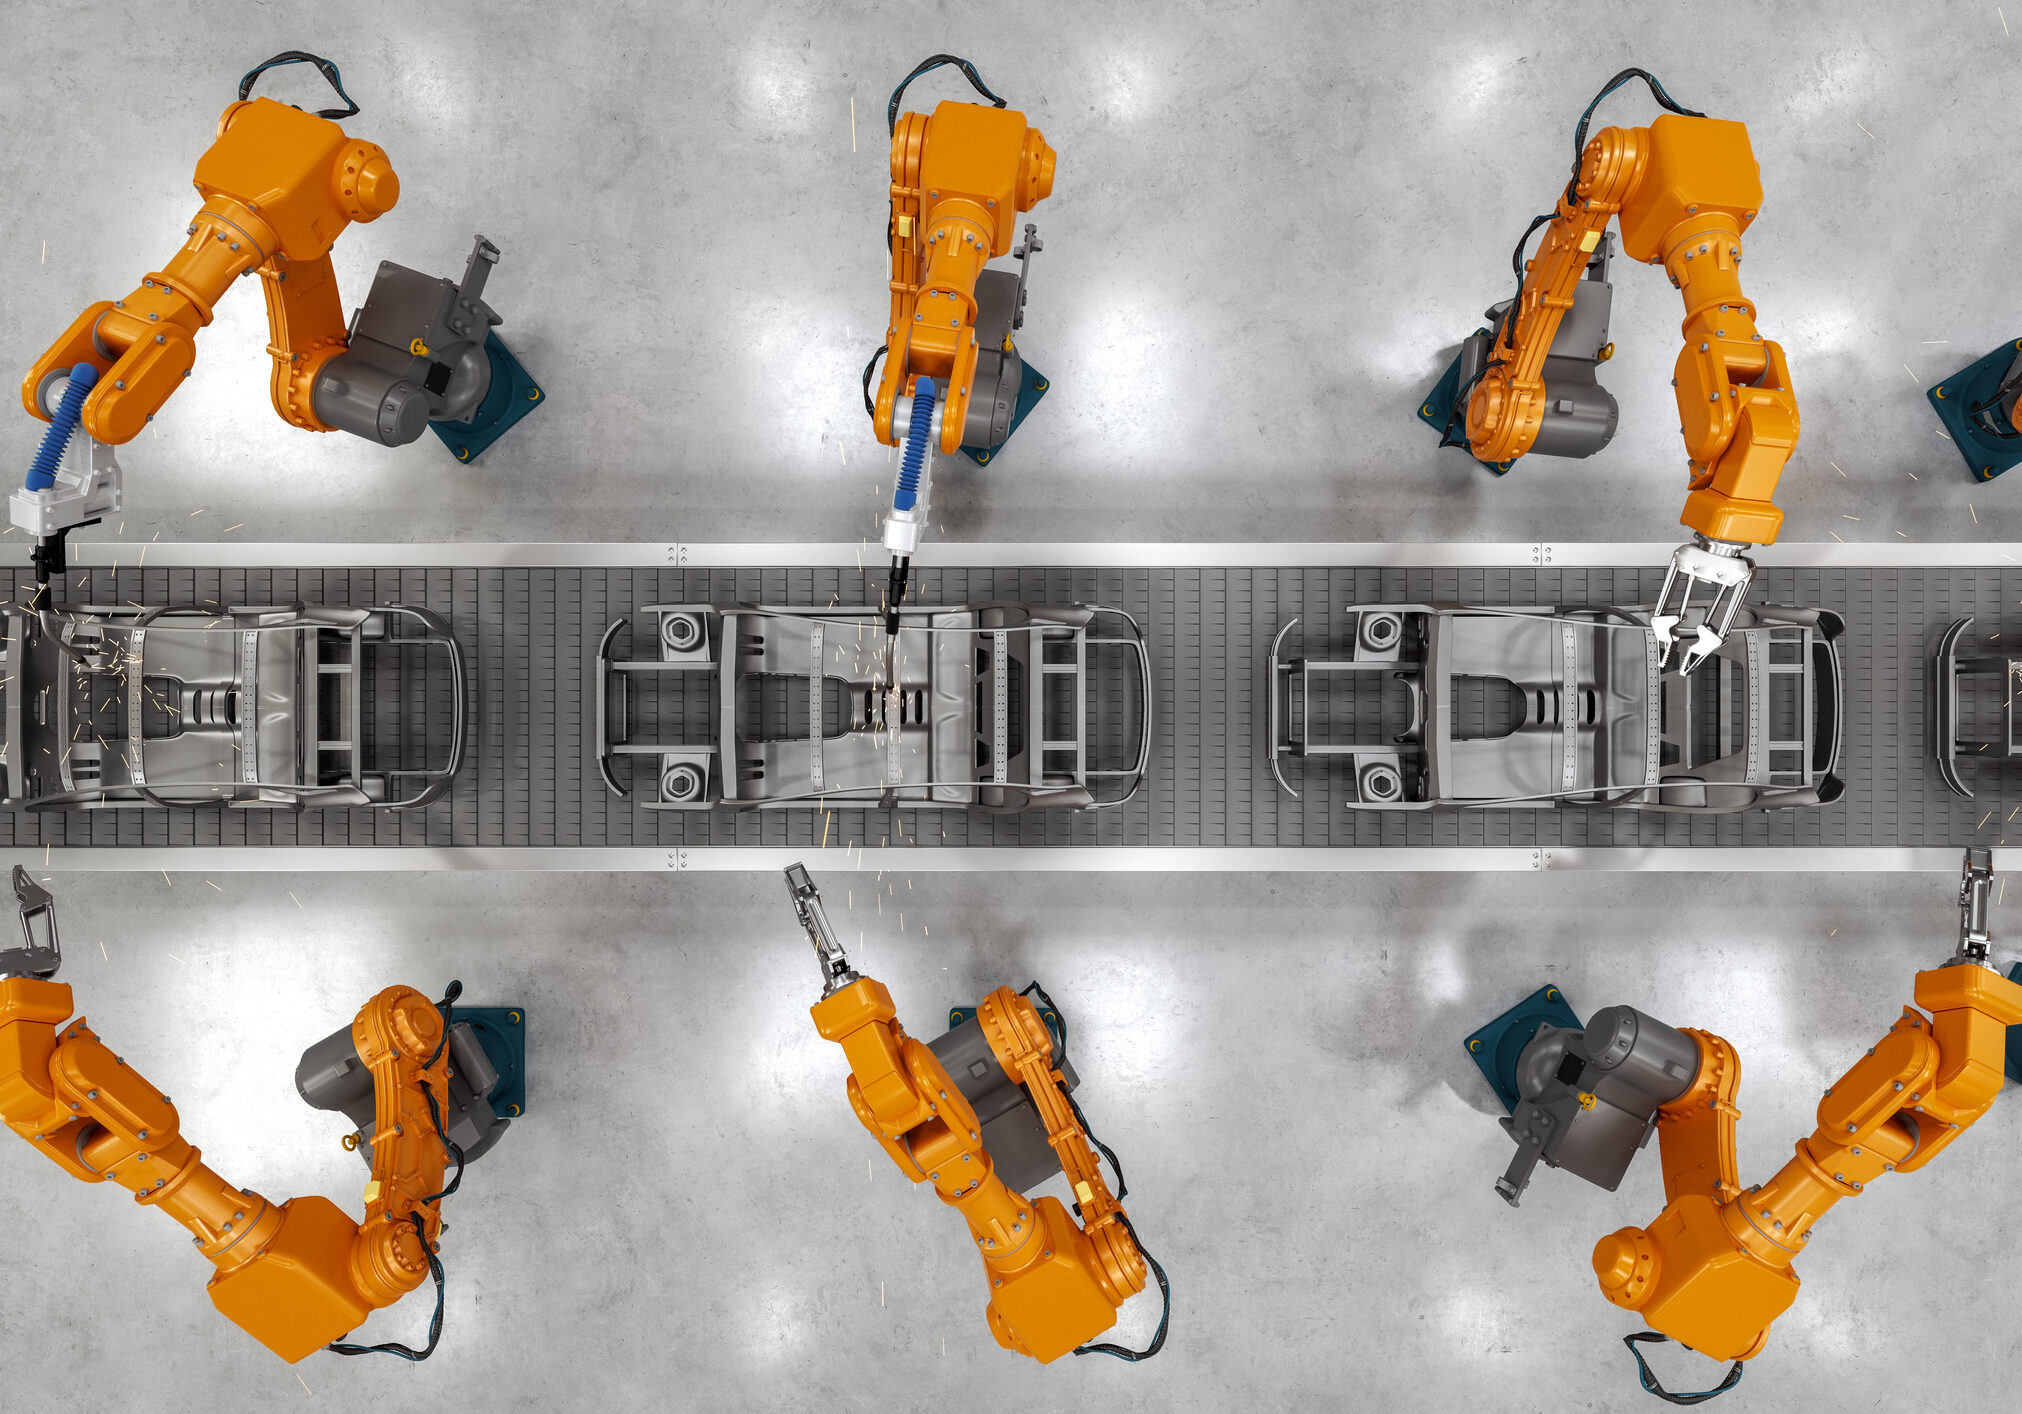 Top view of industrial welding robots at the automated car manufacturing factory assembly line.